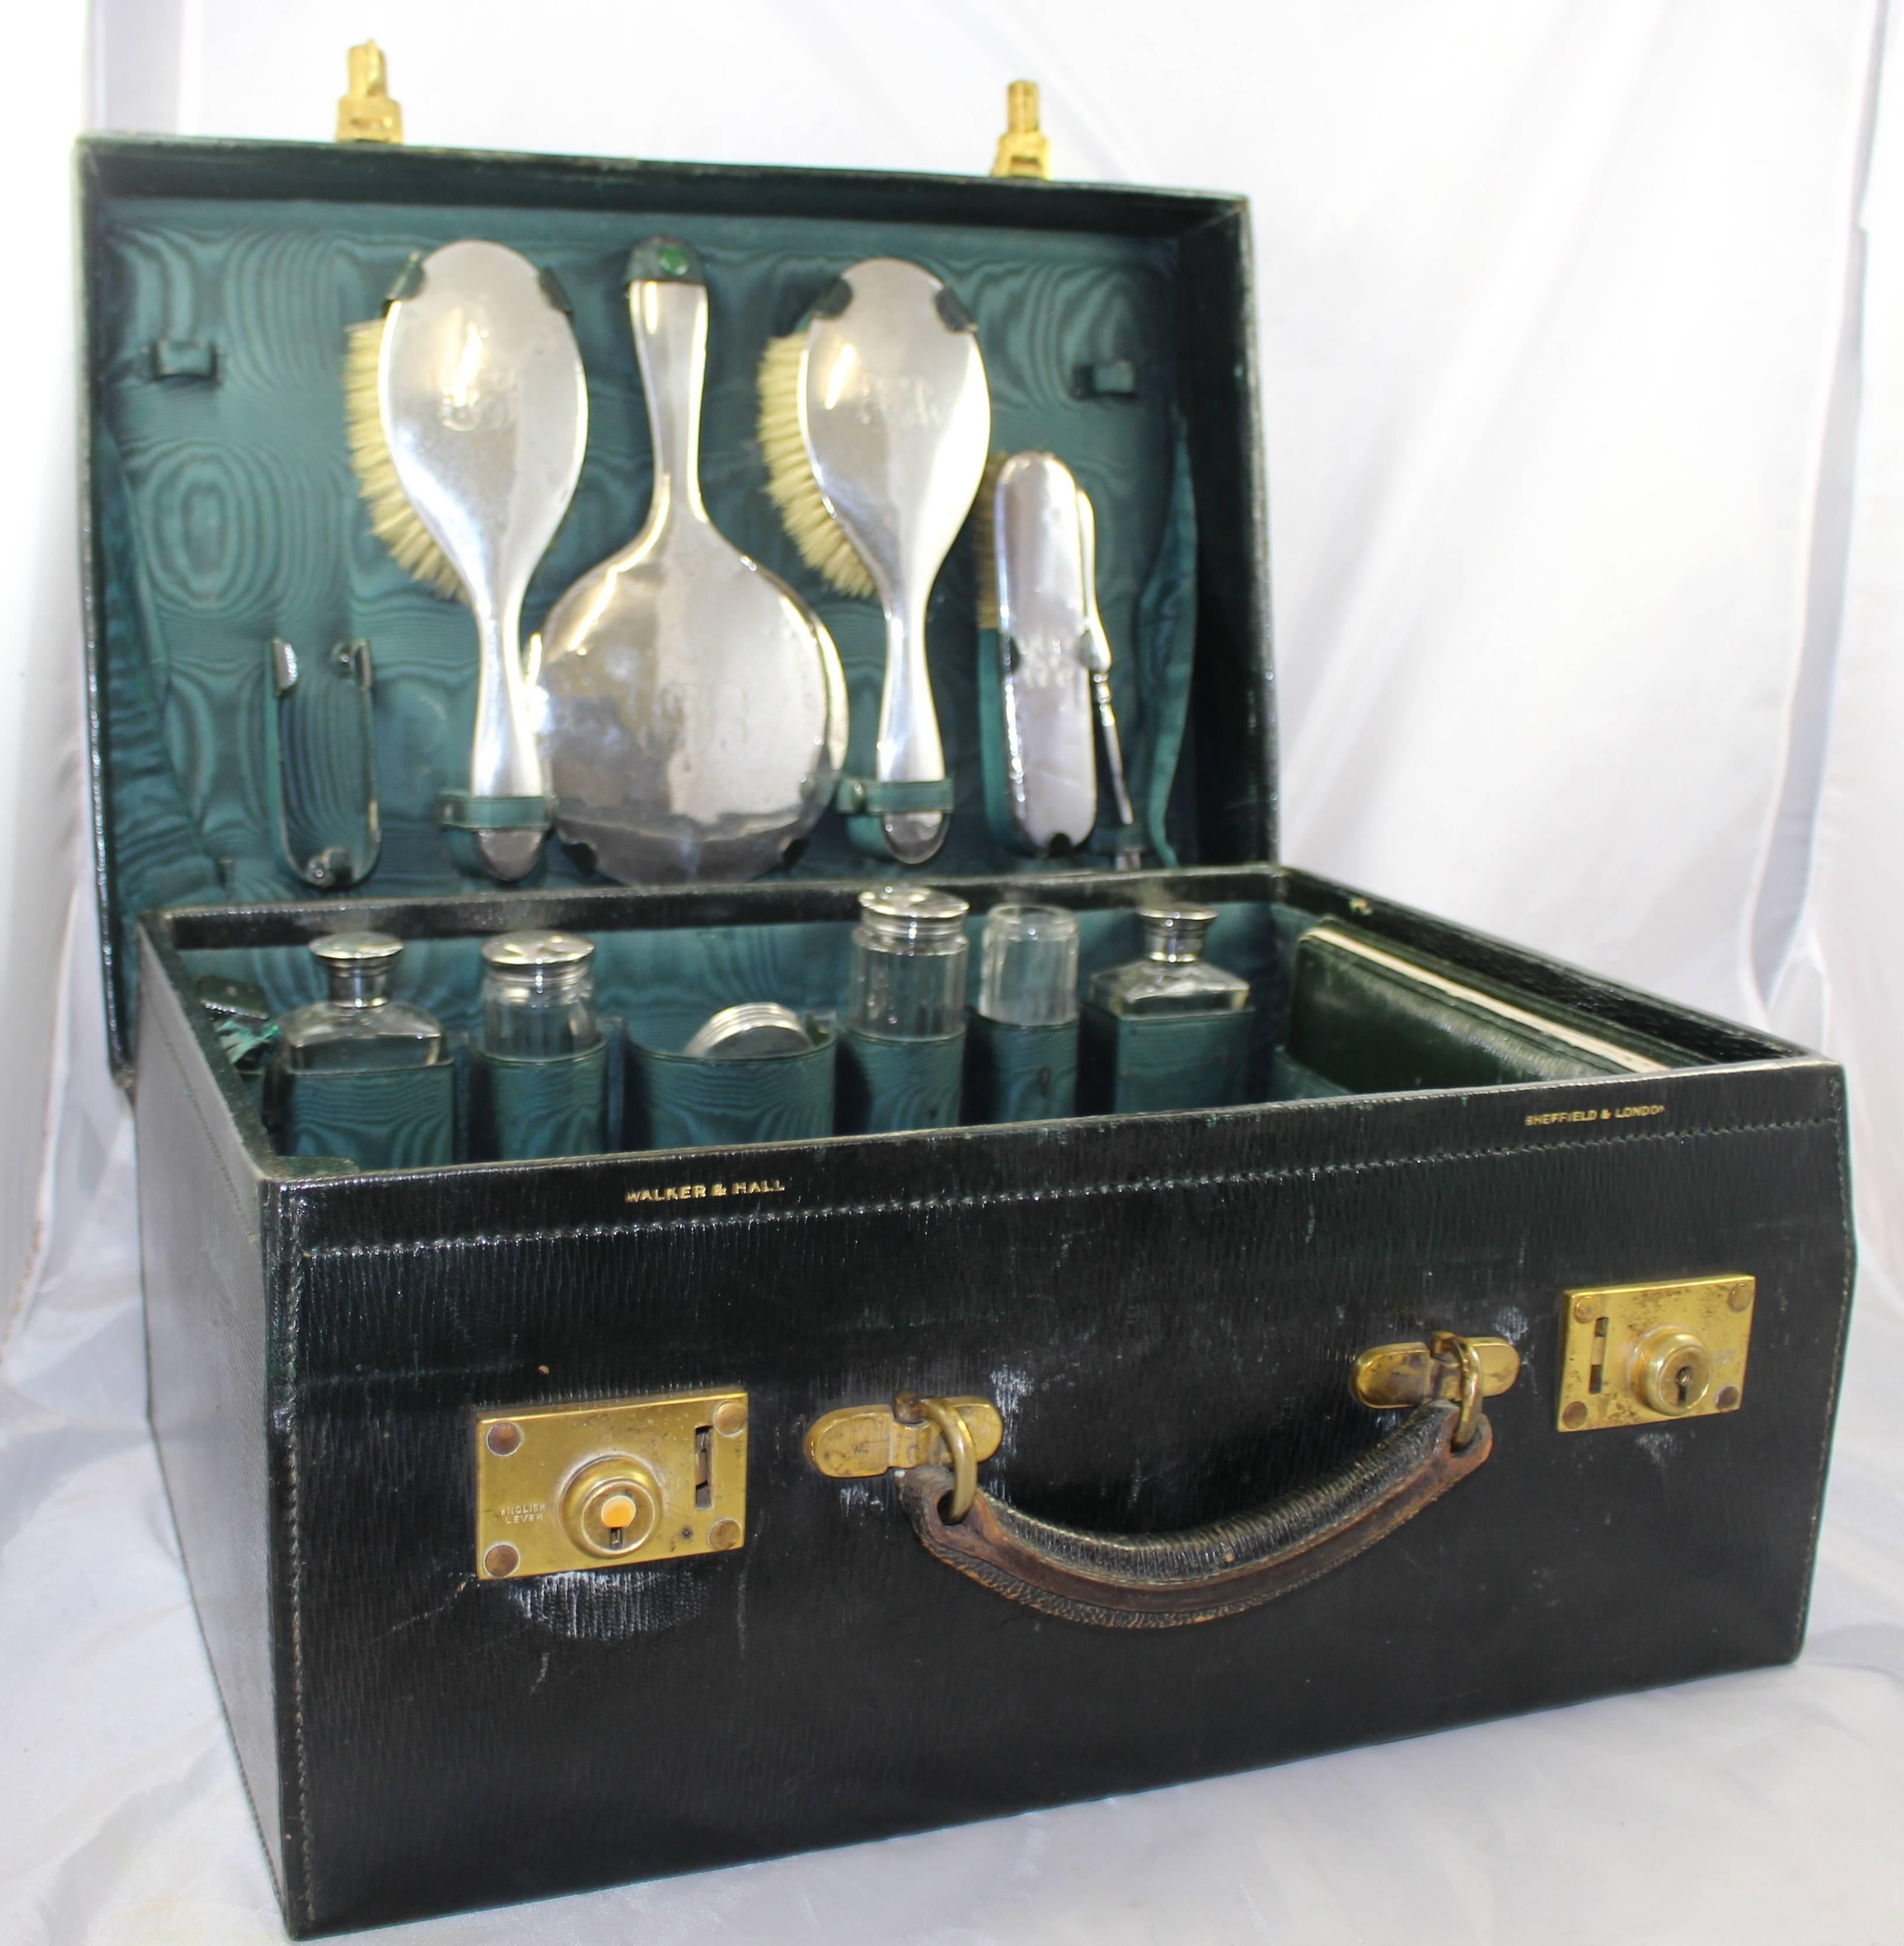 Maker Walker & Hall.
Hallmark Birmingham, 1918 and London, 1917 hallmarks.
Silver sterling, fully hallmarked.
Case width 45 cm / 17 3/4 in.
Case depth 33 cm / 13 in.
Case height 20 cm / 8 in.
Condition good condition commensurate with age.